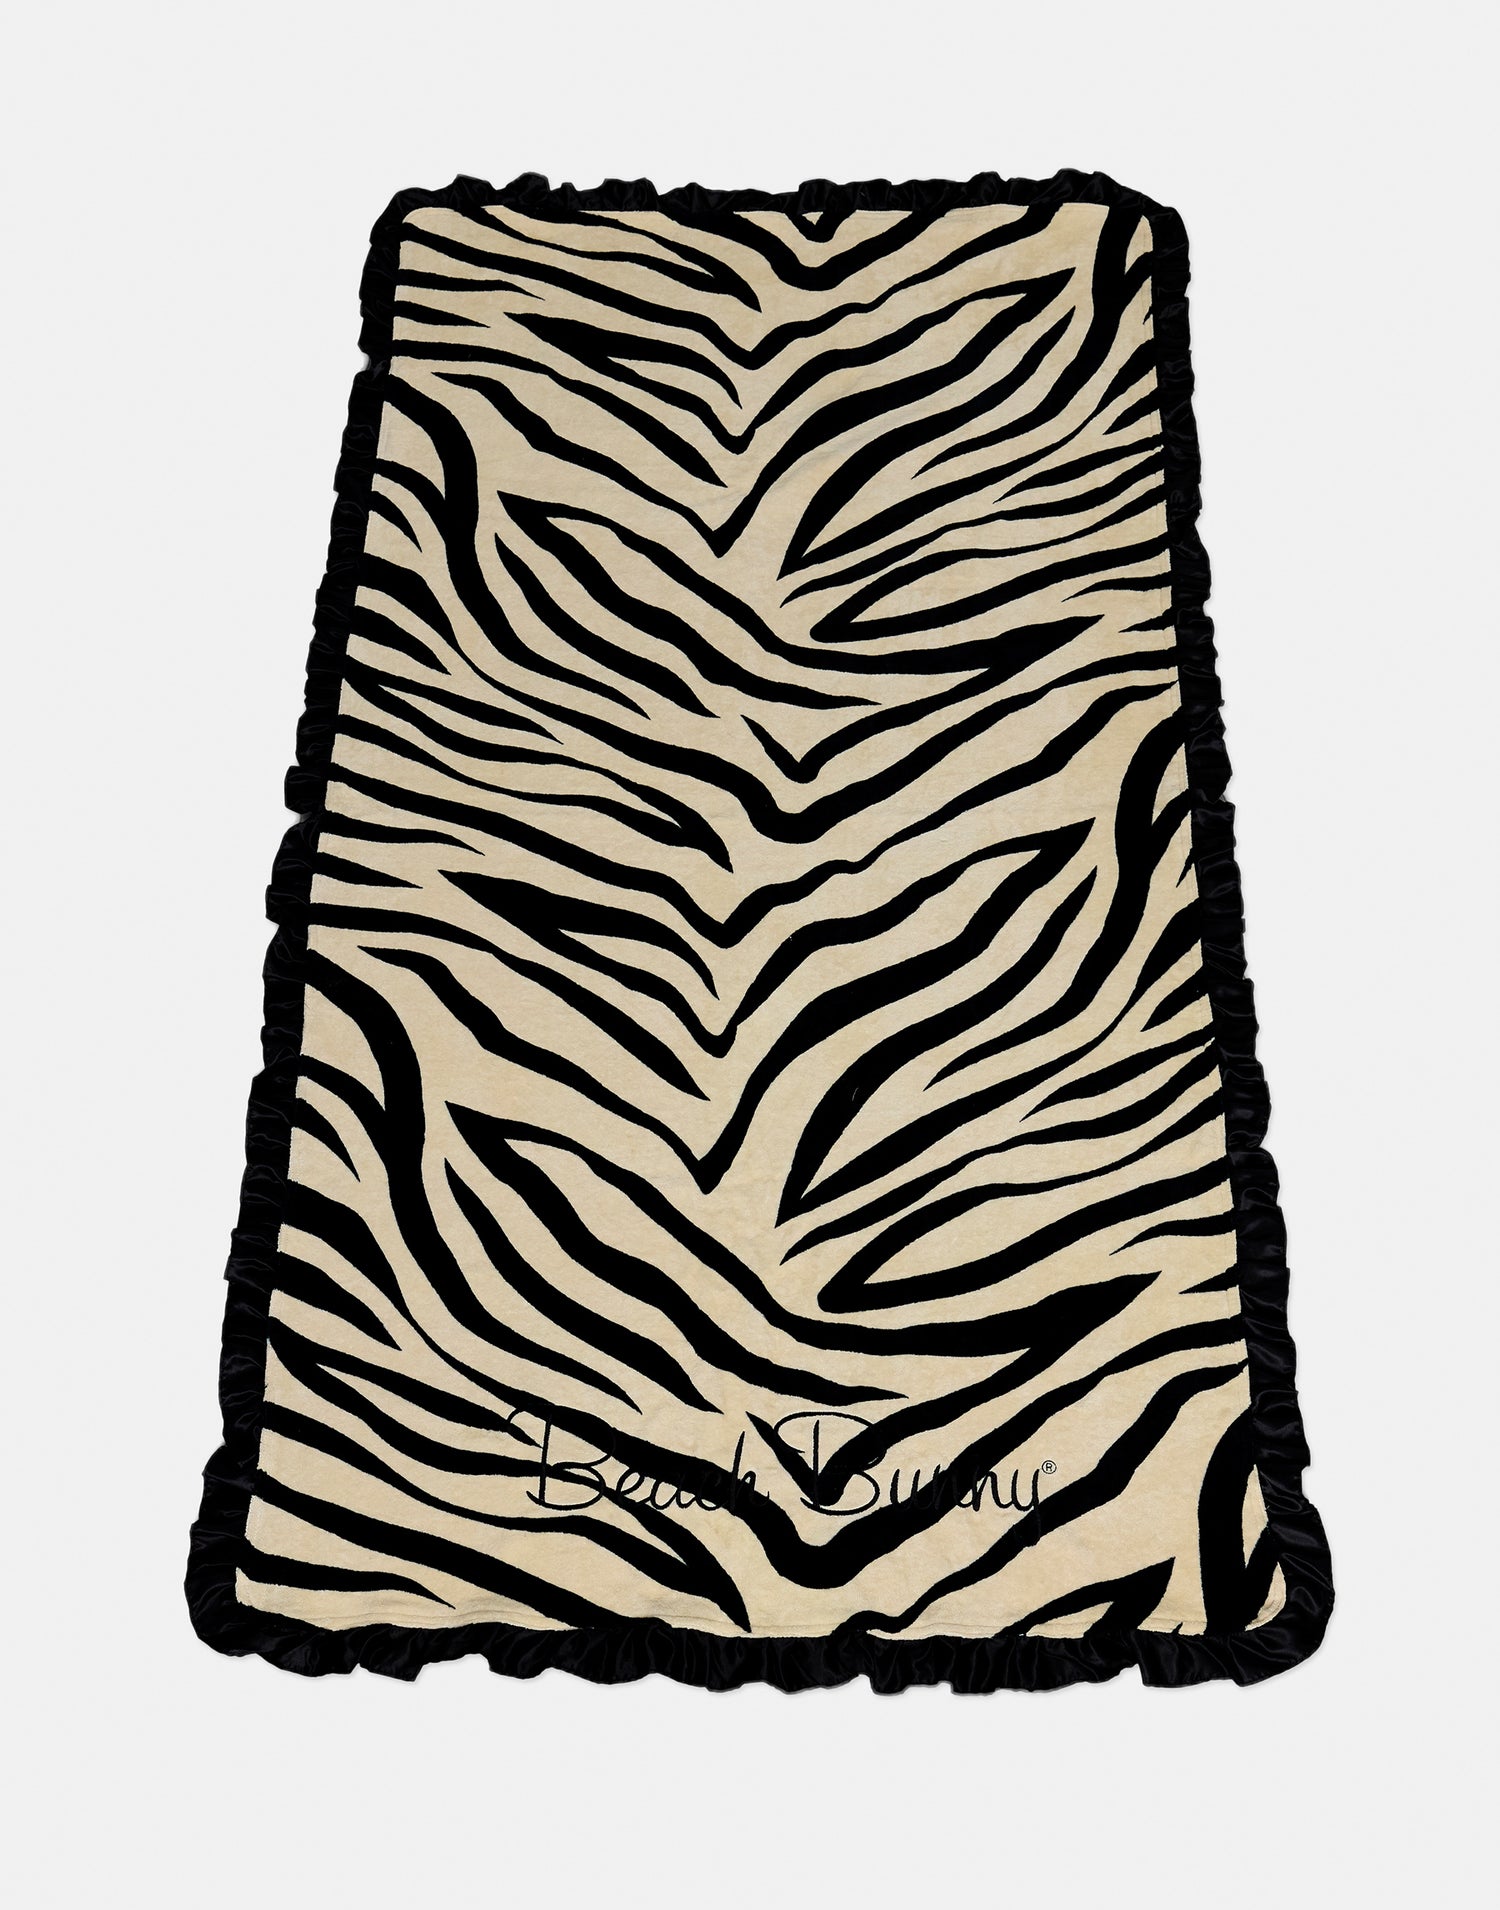 Black/Nude Tiger Beach Towel with Black Ruffle Trim - Product View